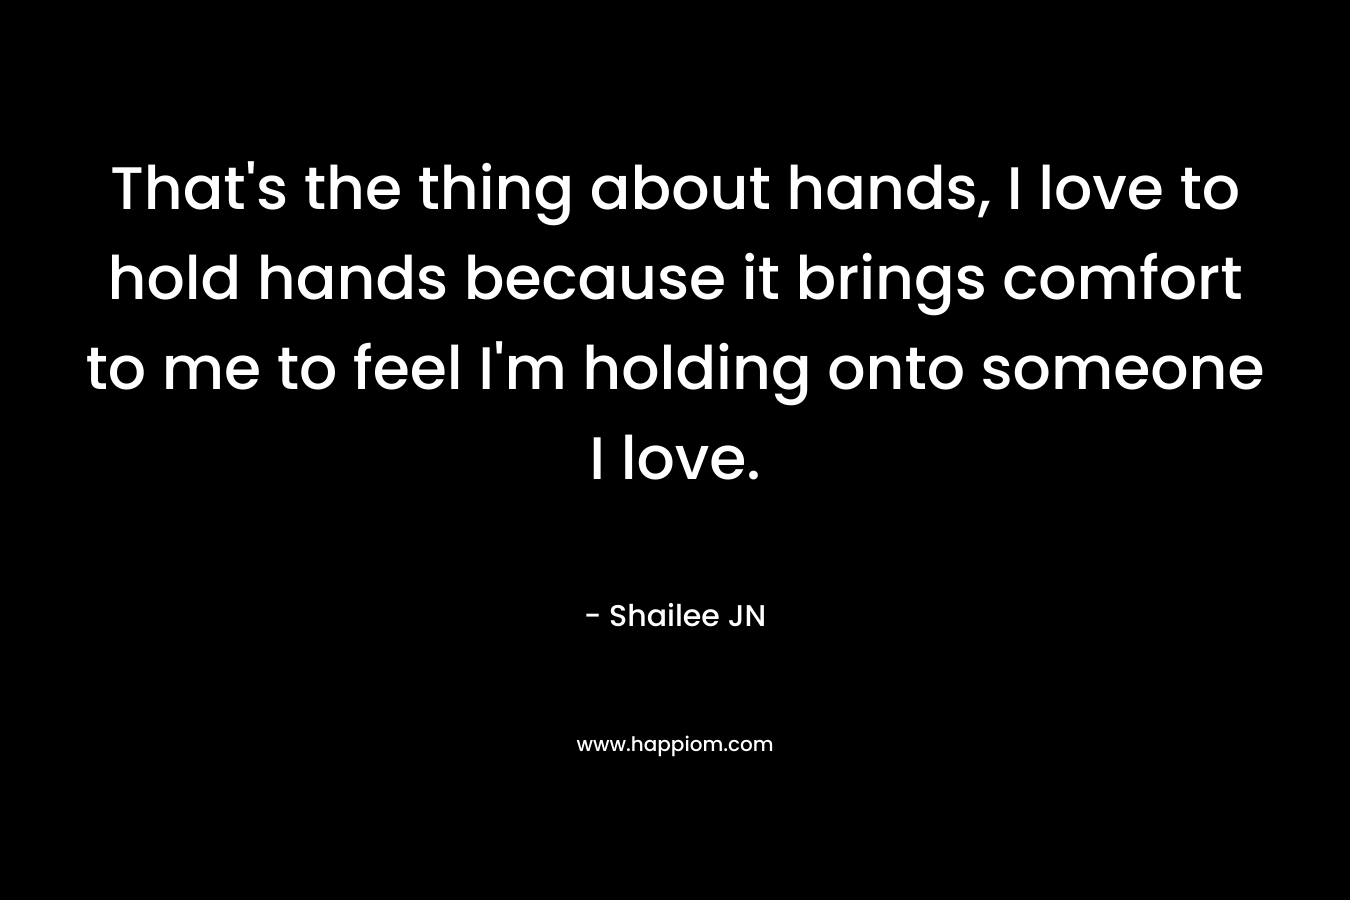 That's the thing about hands, I love to hold hands because it brings comfort to me to feel I'm holding onto someone I love.